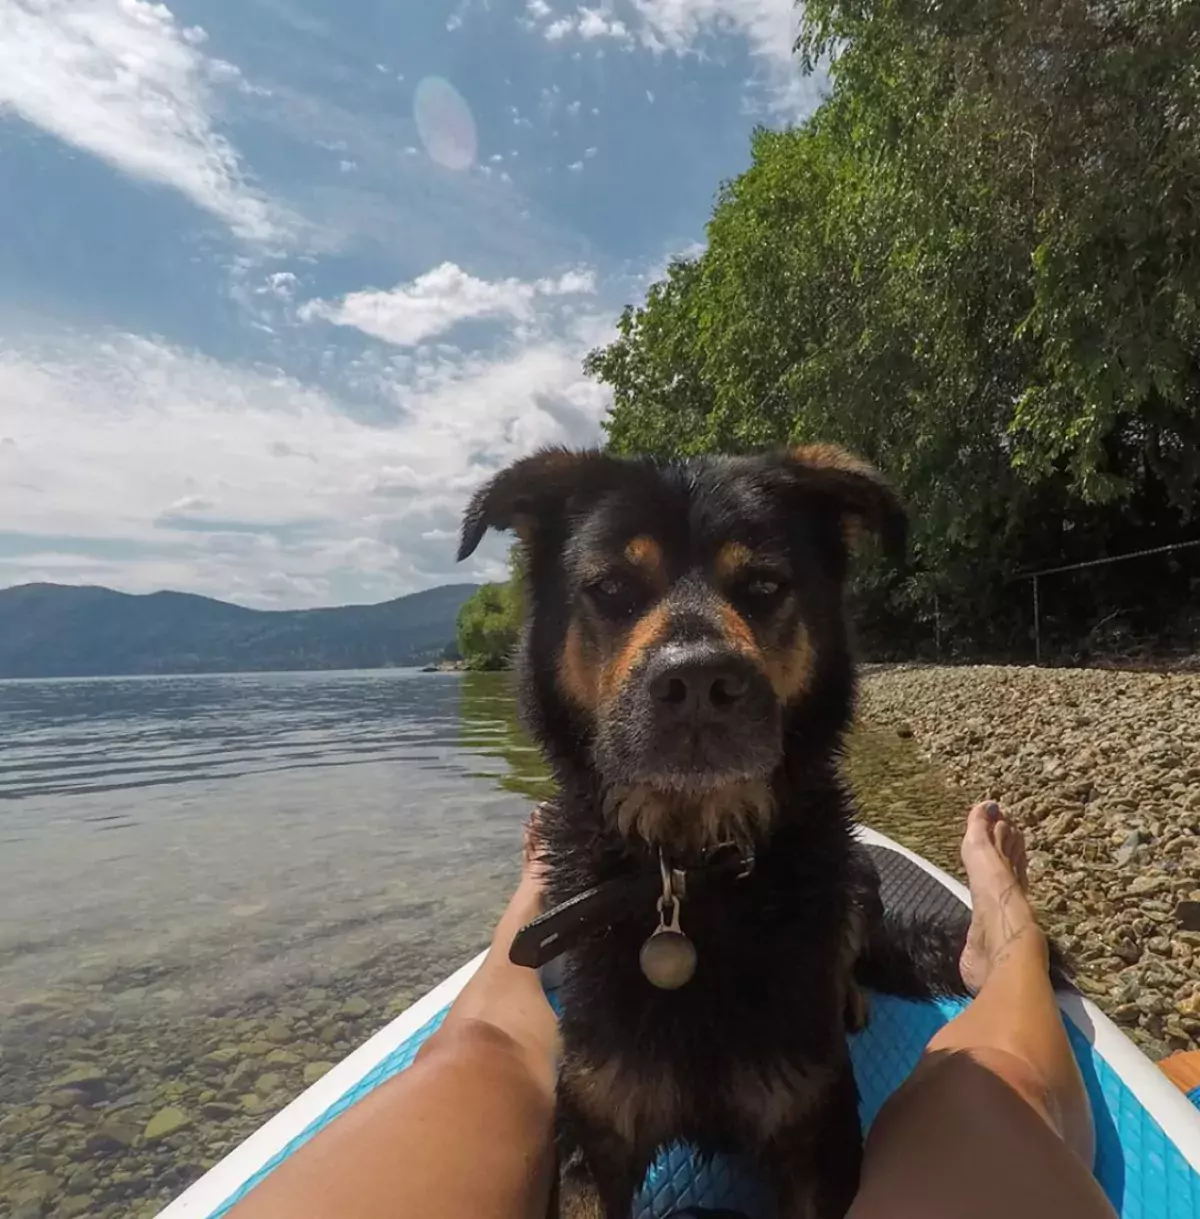 A dog in a canoe looks at the camera on a beach in British Columbia